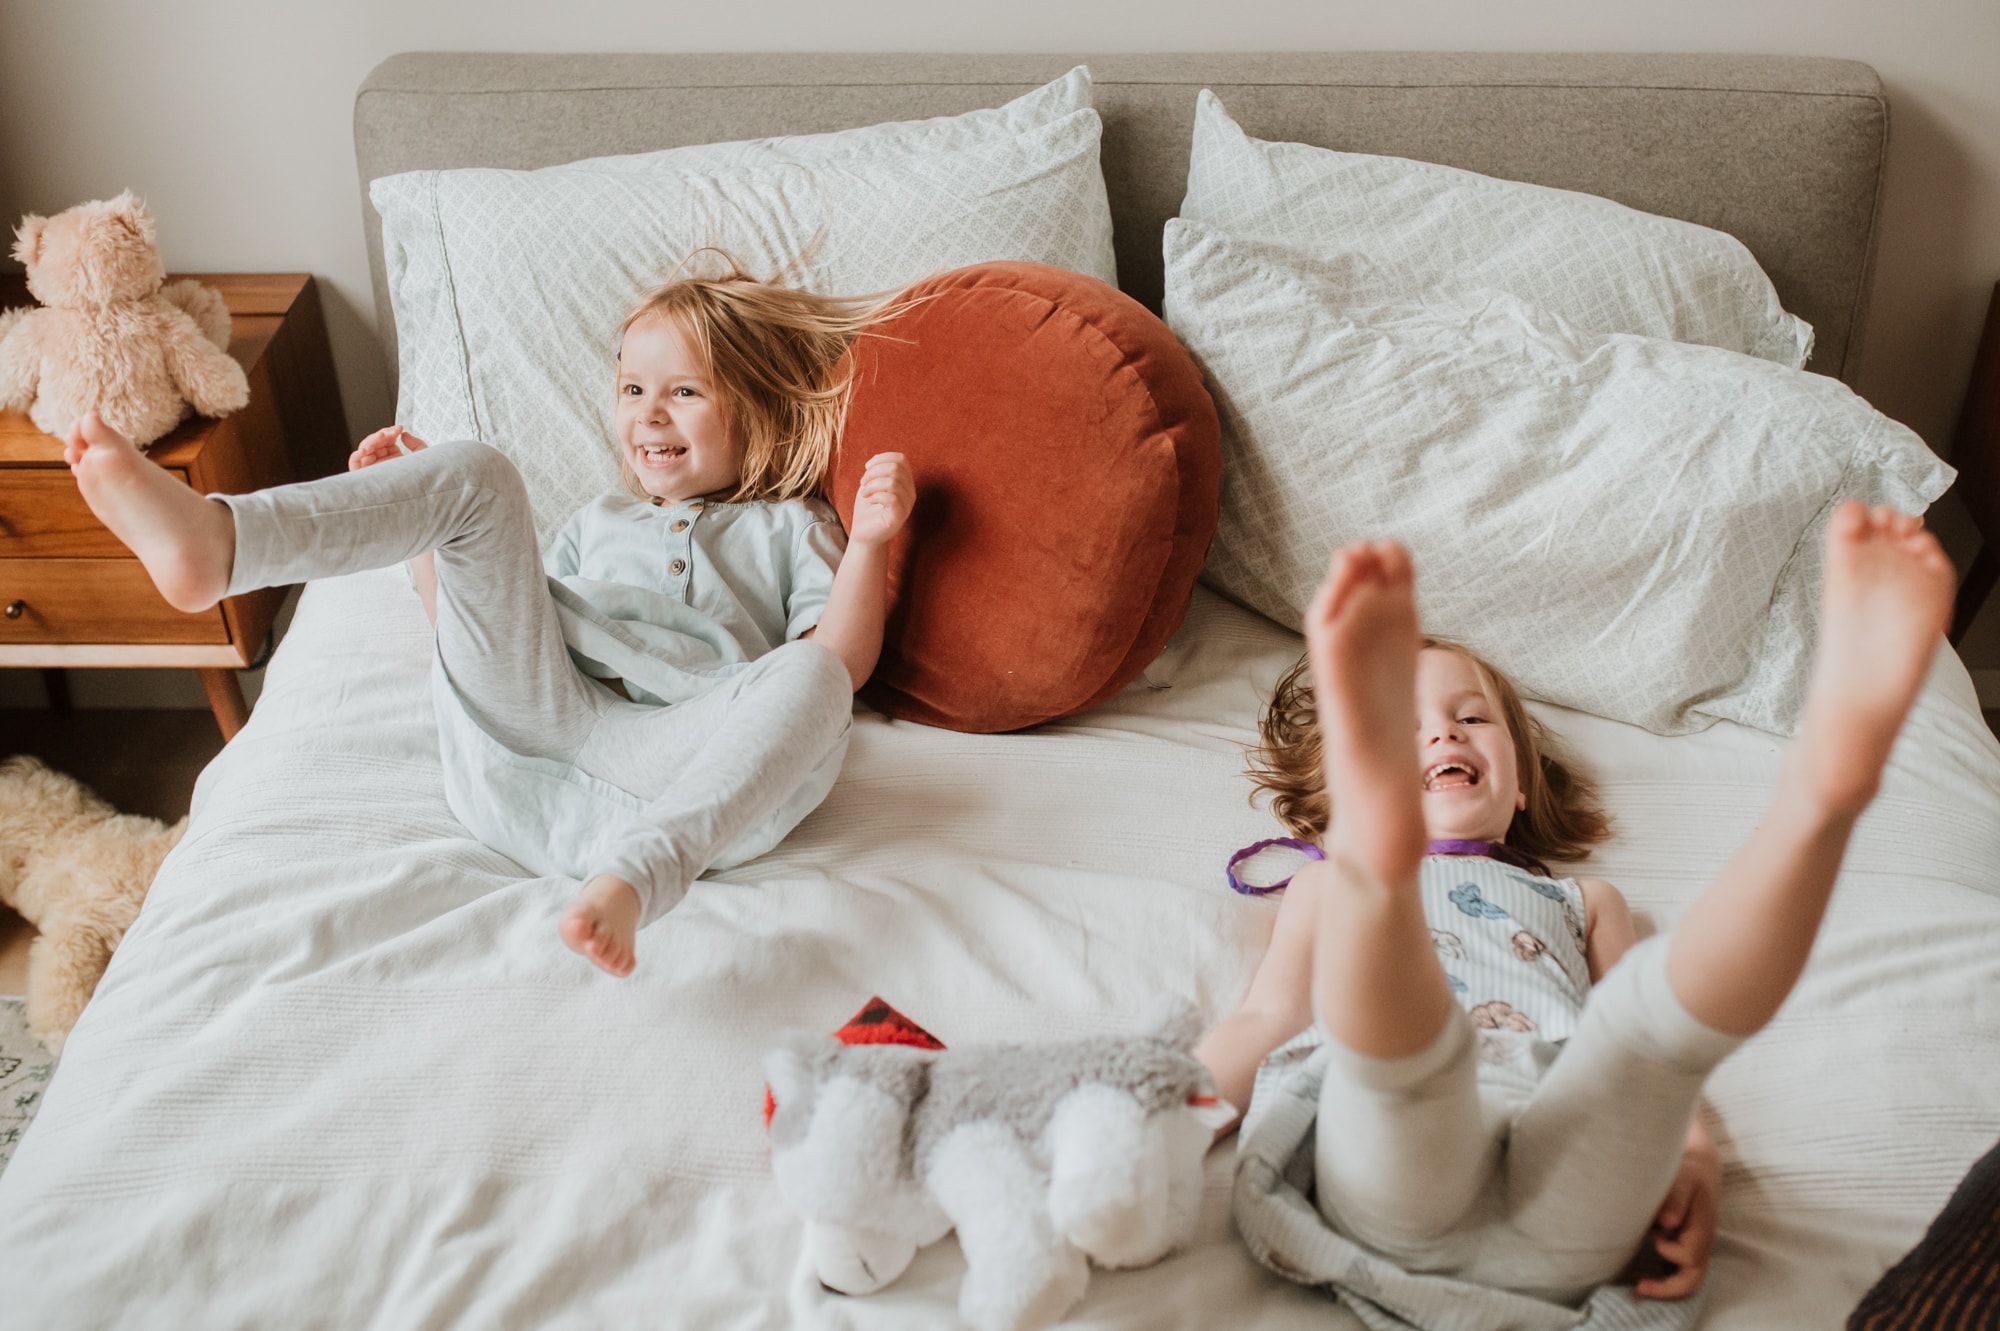 Two girls jumping wildly on their parents' bed in fun Vancouver family photos.